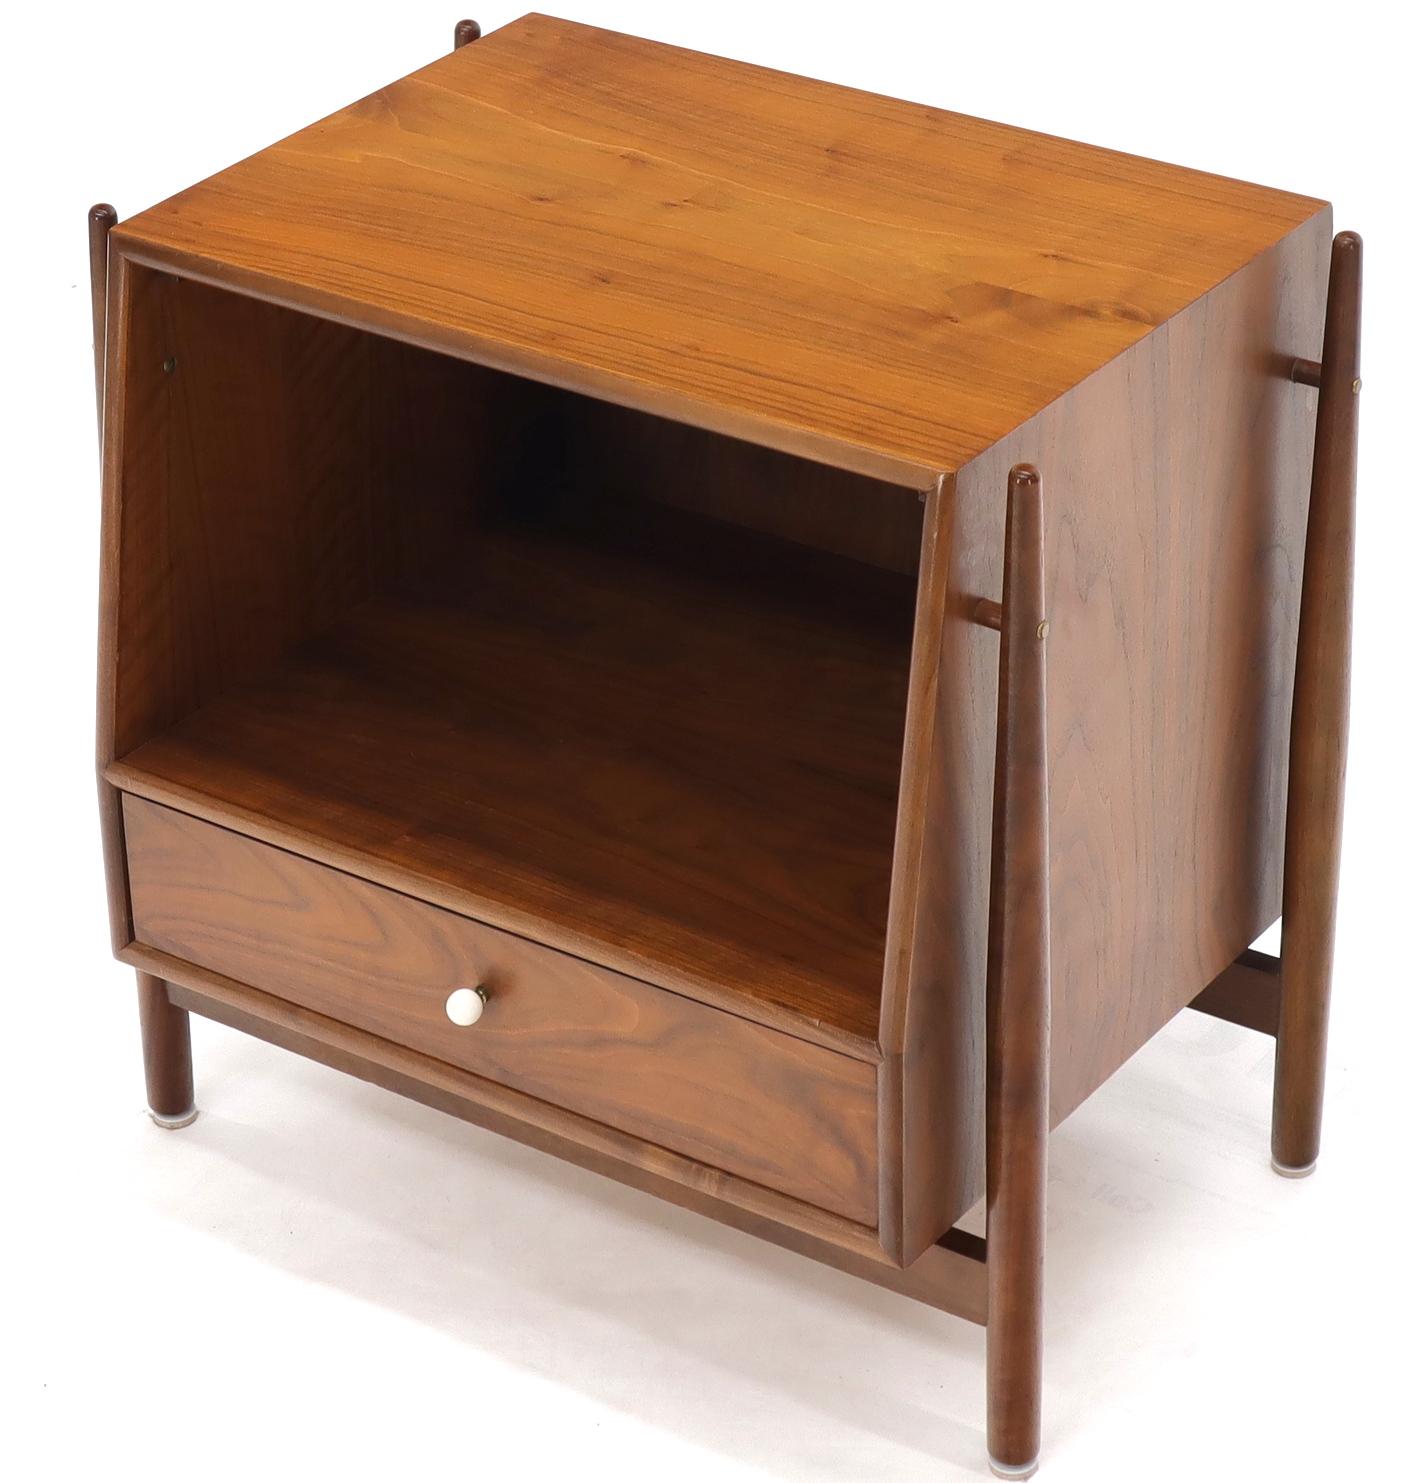 20th Century Pair of Walnut Mid-Century Modern End Tables Night Stands by Drexel